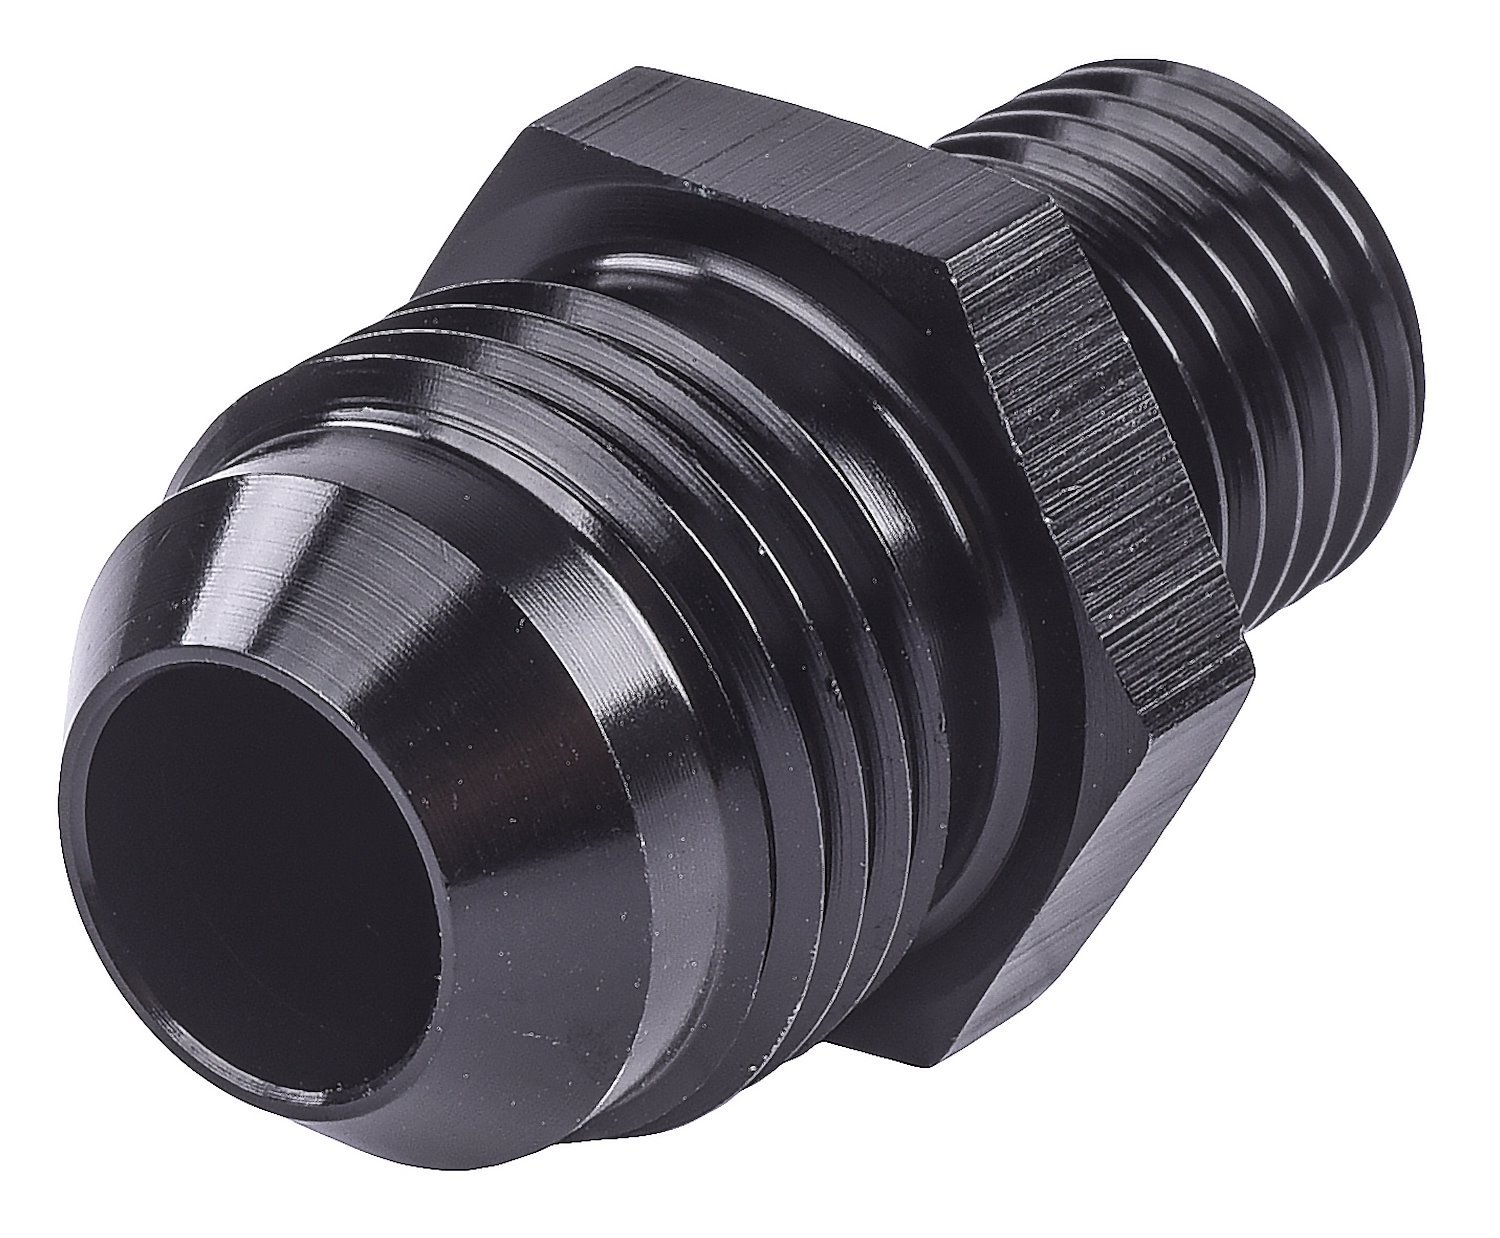 AN to Metric Adapter Fitting [-8 AN Male to 14mm x 1.5 Male]